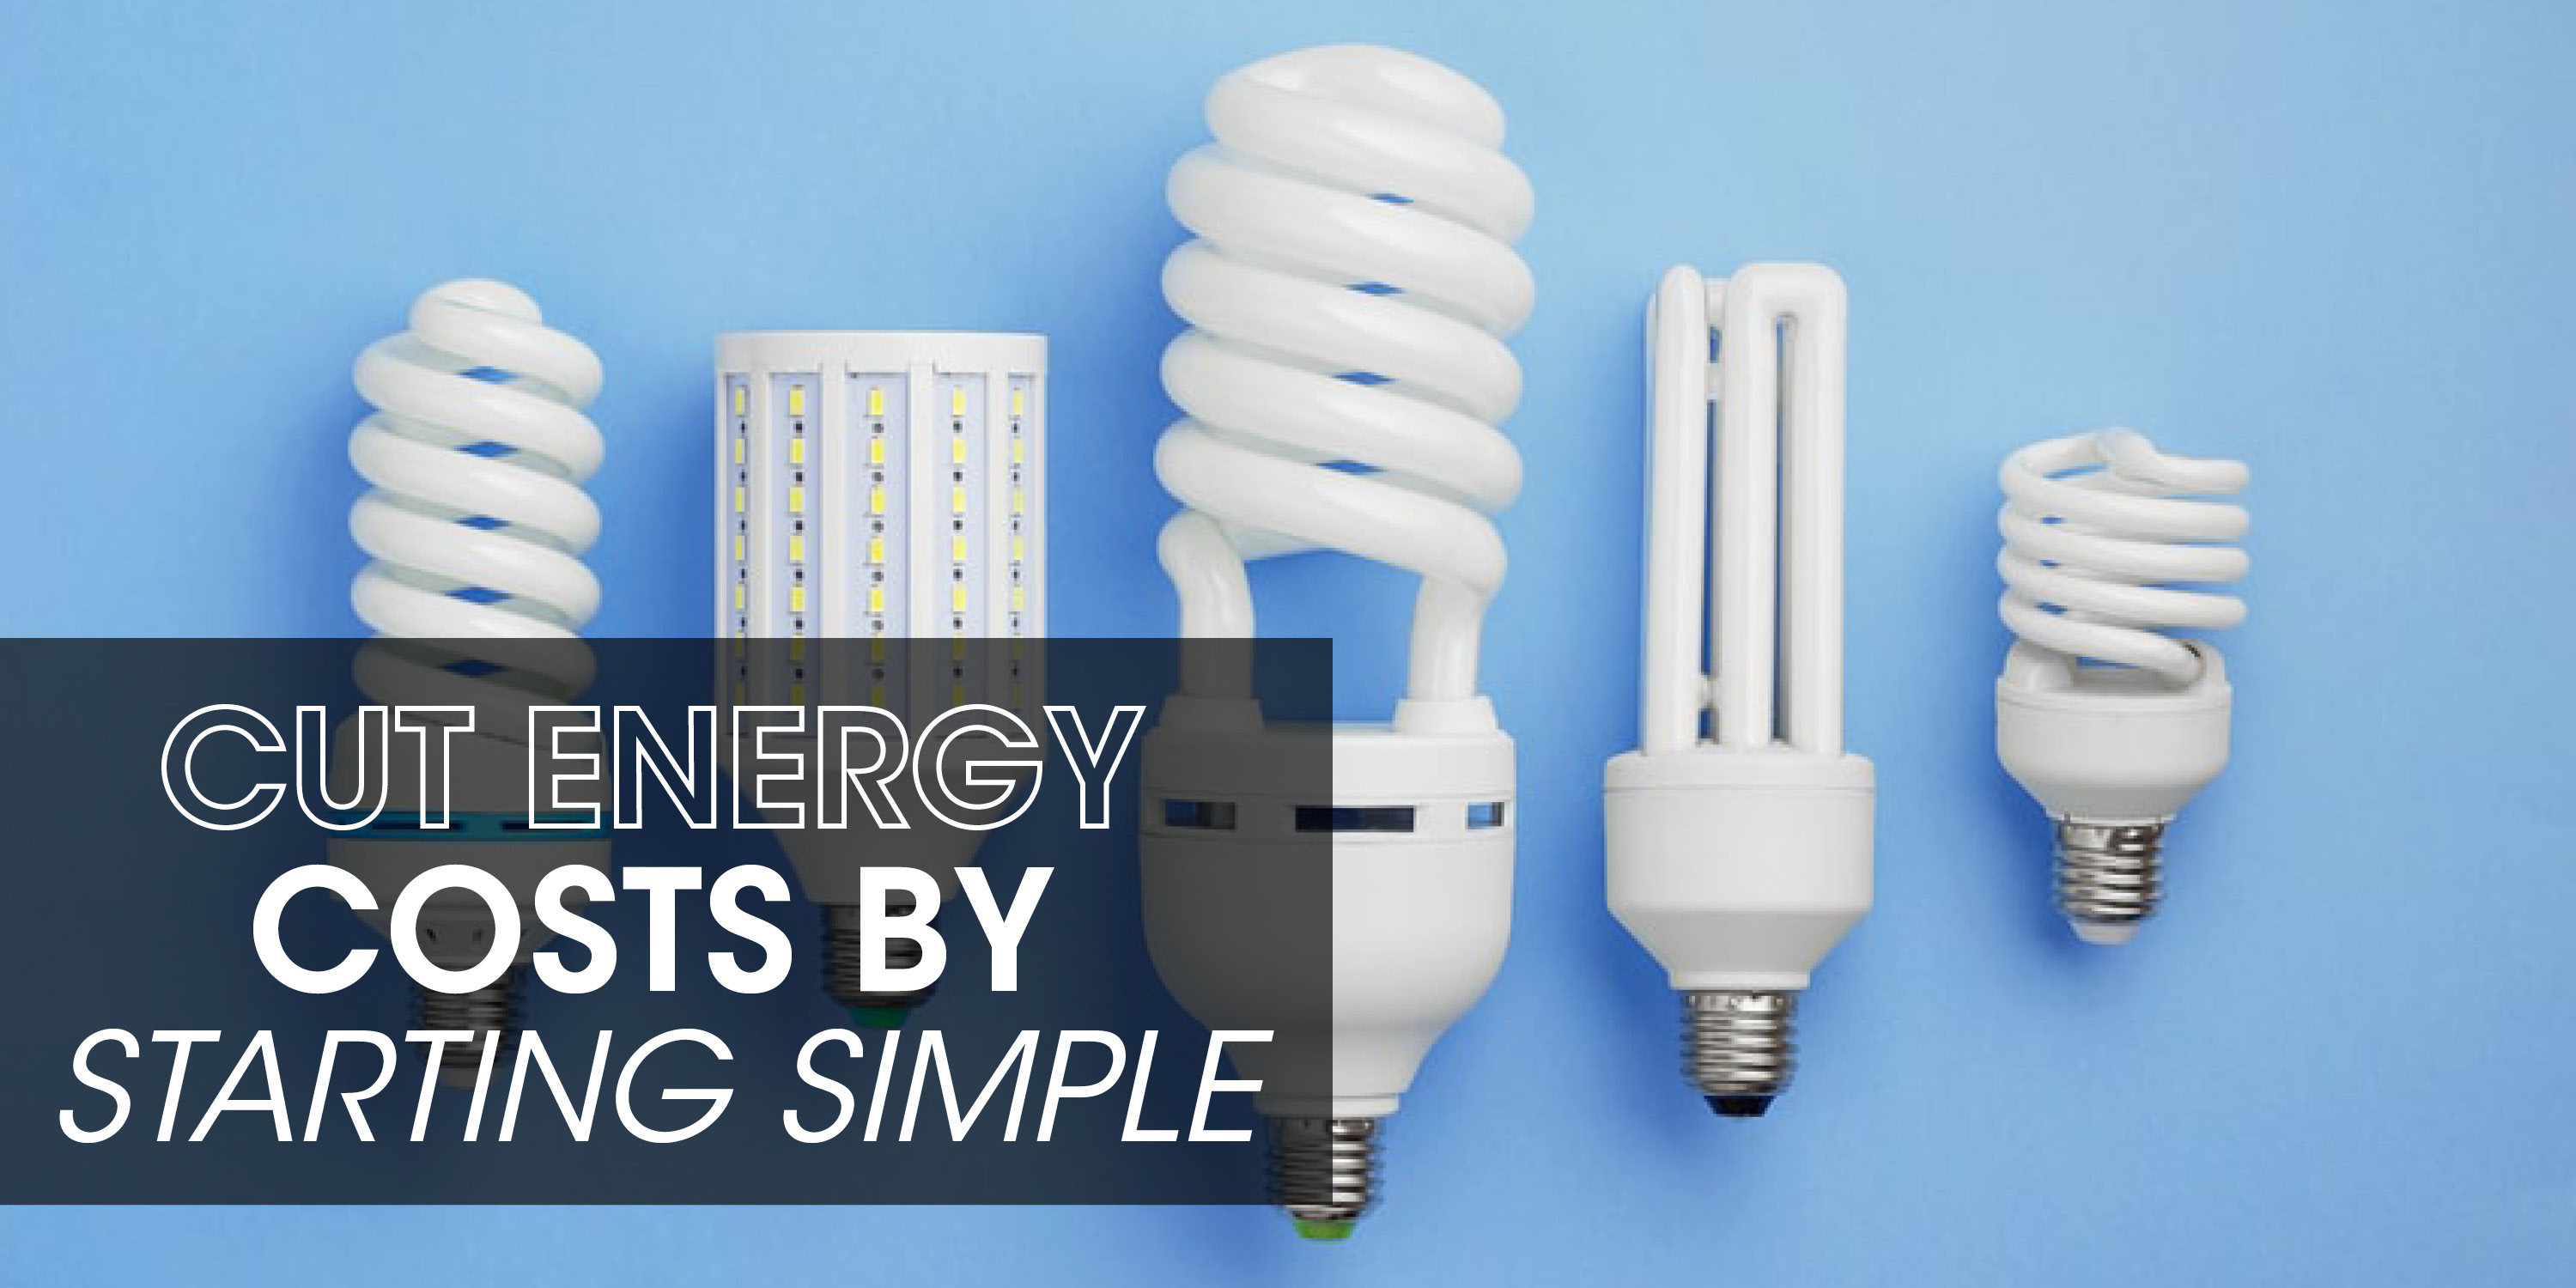 Light bulbs with text: "Cut energy costs by starting simple"